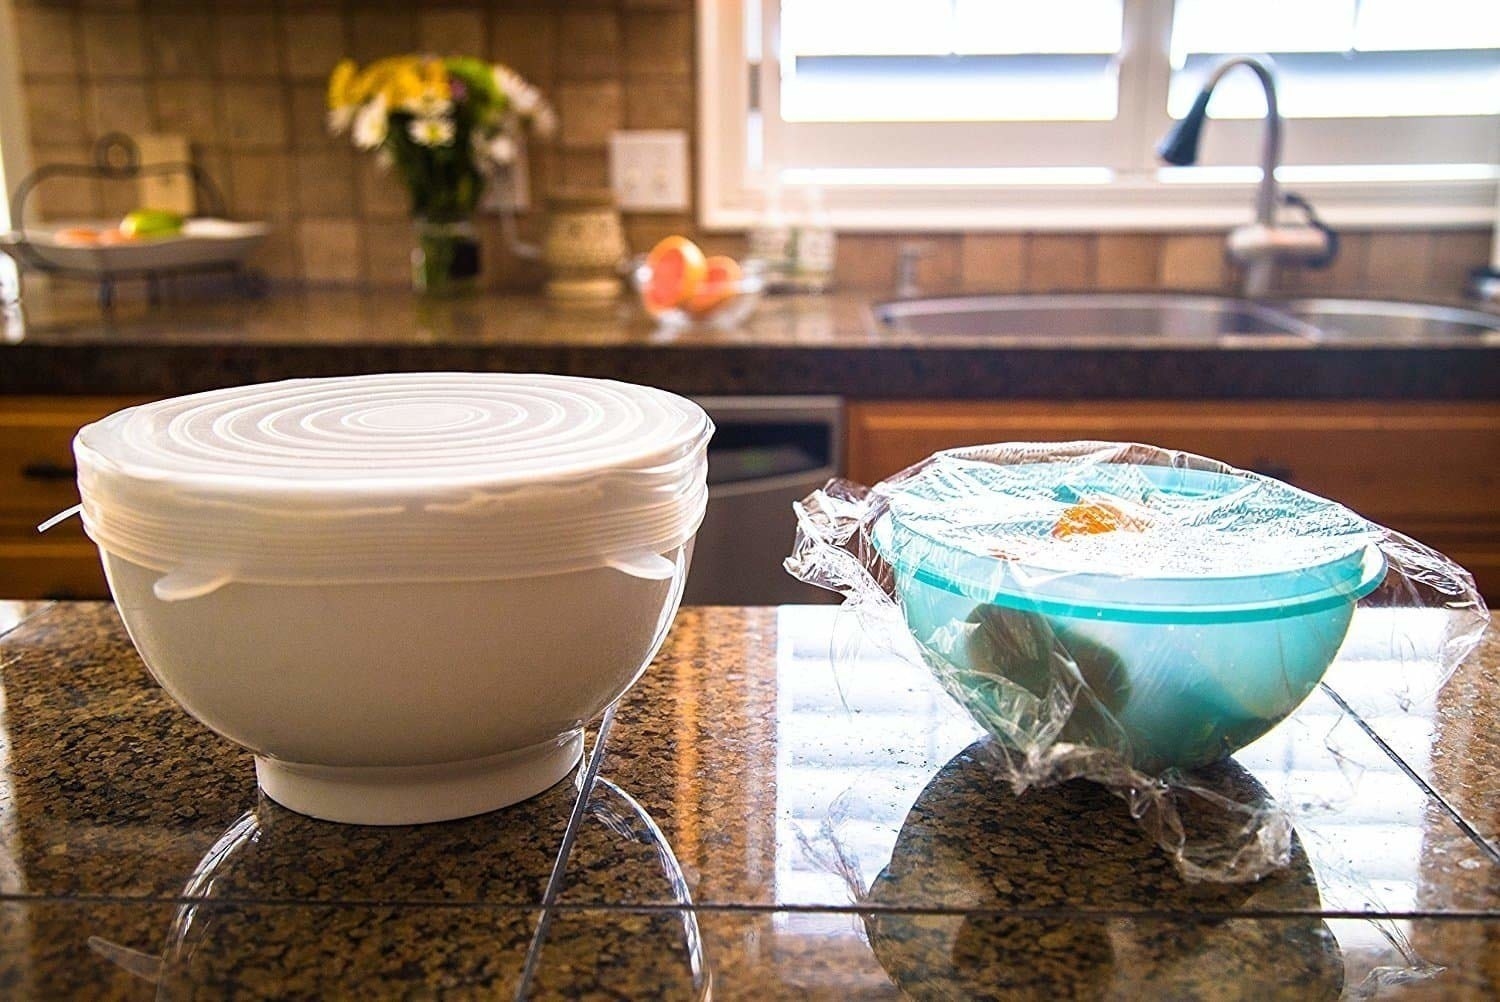 a bowl with the stretch lid on the left and on the right is a bowl with plastic wrap that is not holding tight like the stretch lid